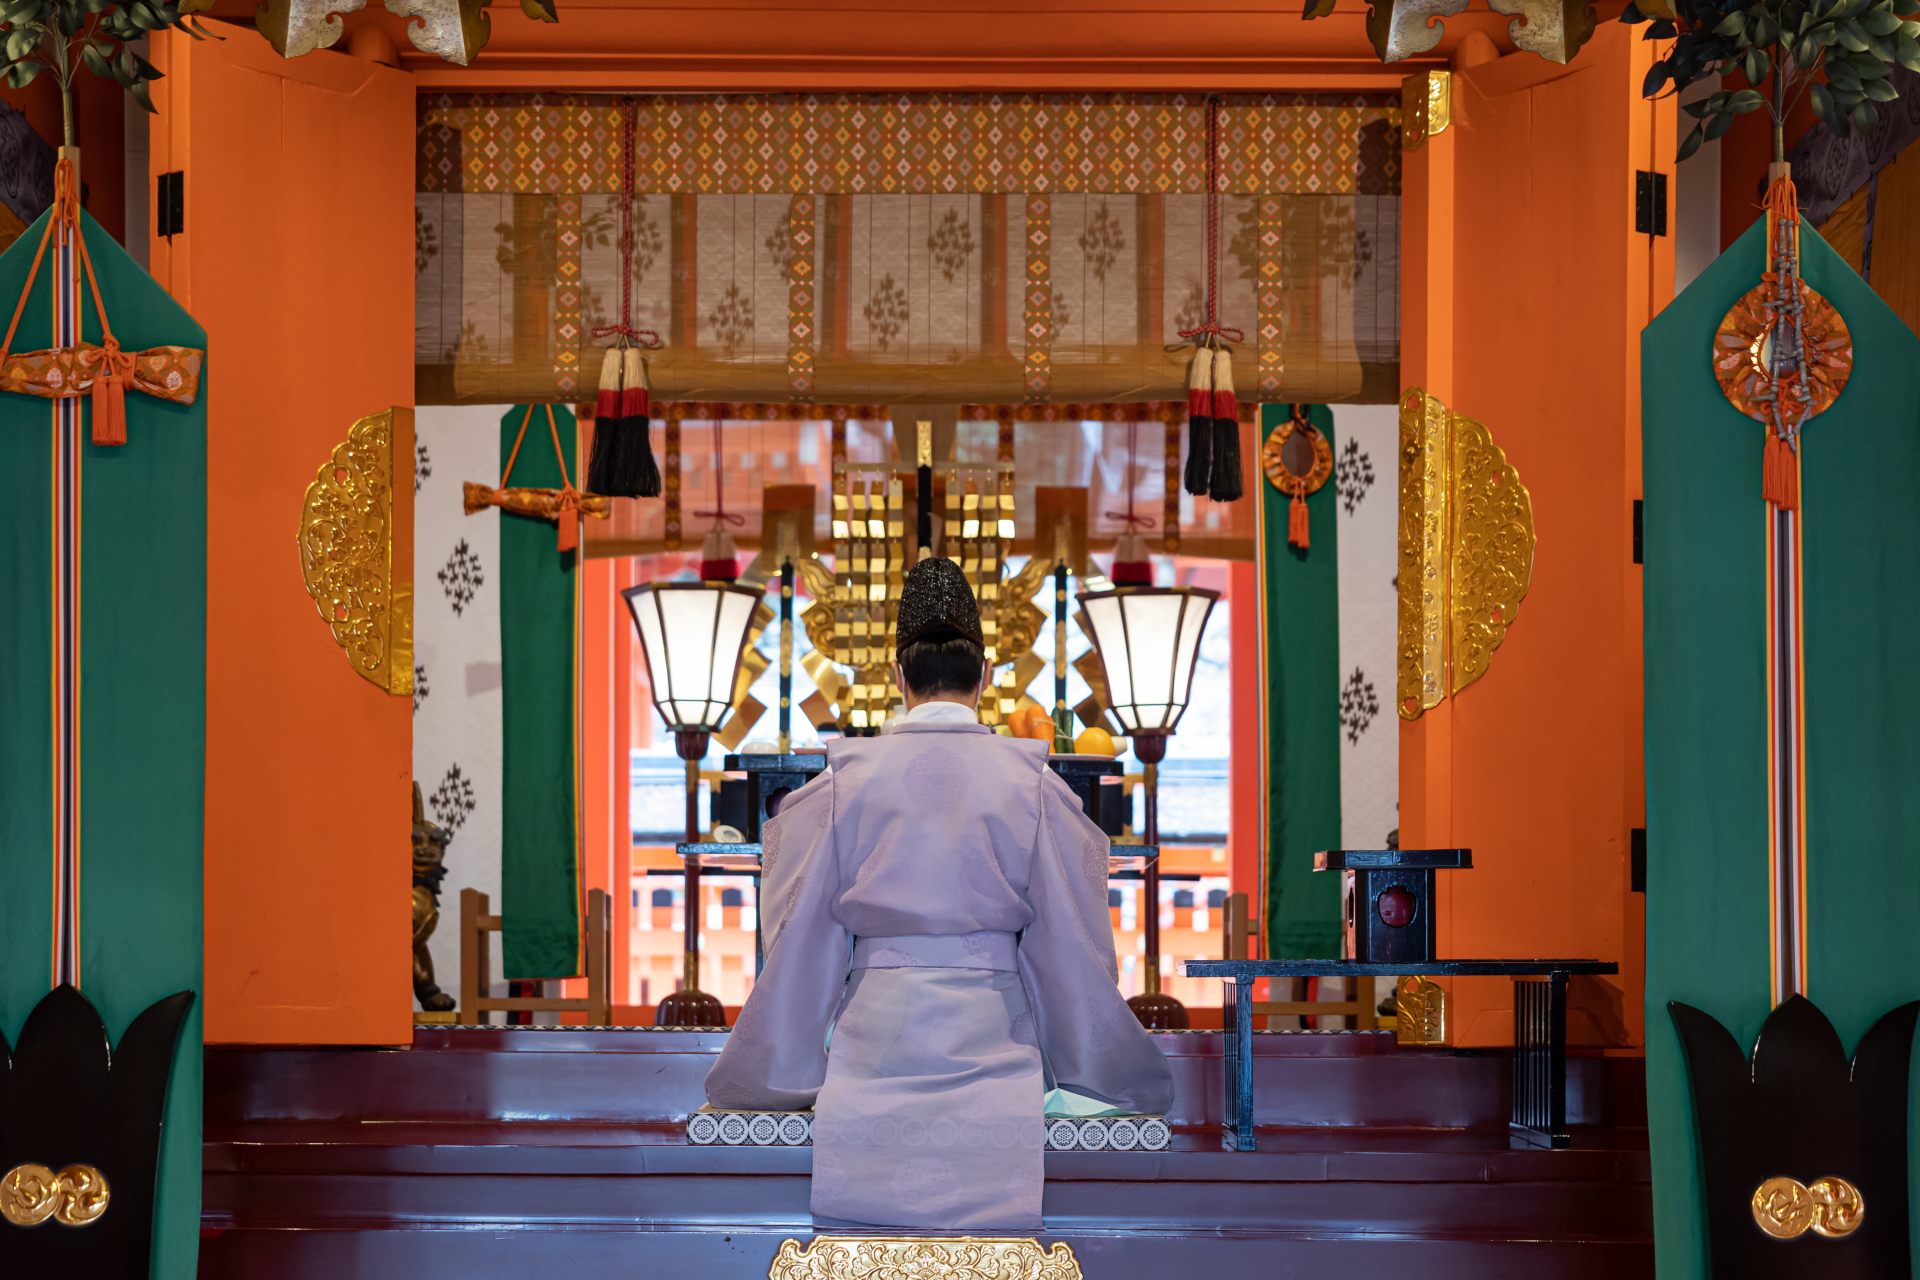 Worship inside the haiden (hall of worship) and experience Shinto rituals, including prayers, purification, and kagura (Shinto performing arts).